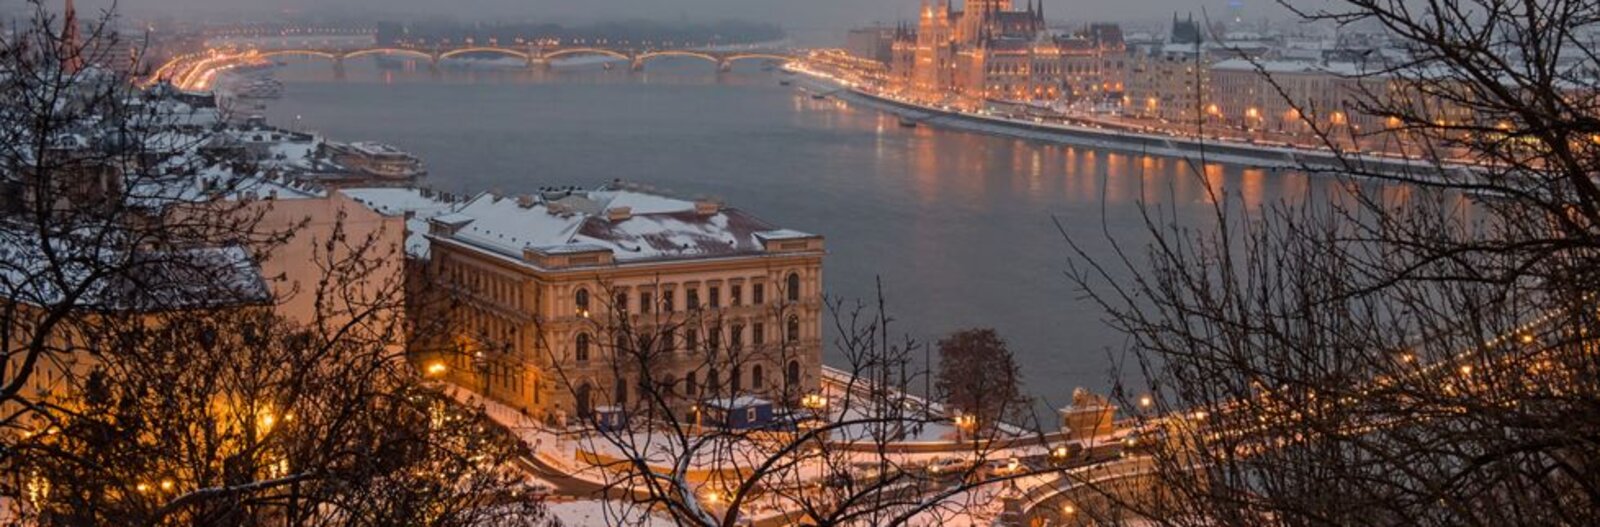 12 reasons to visit Budapest in winter 2016-2017